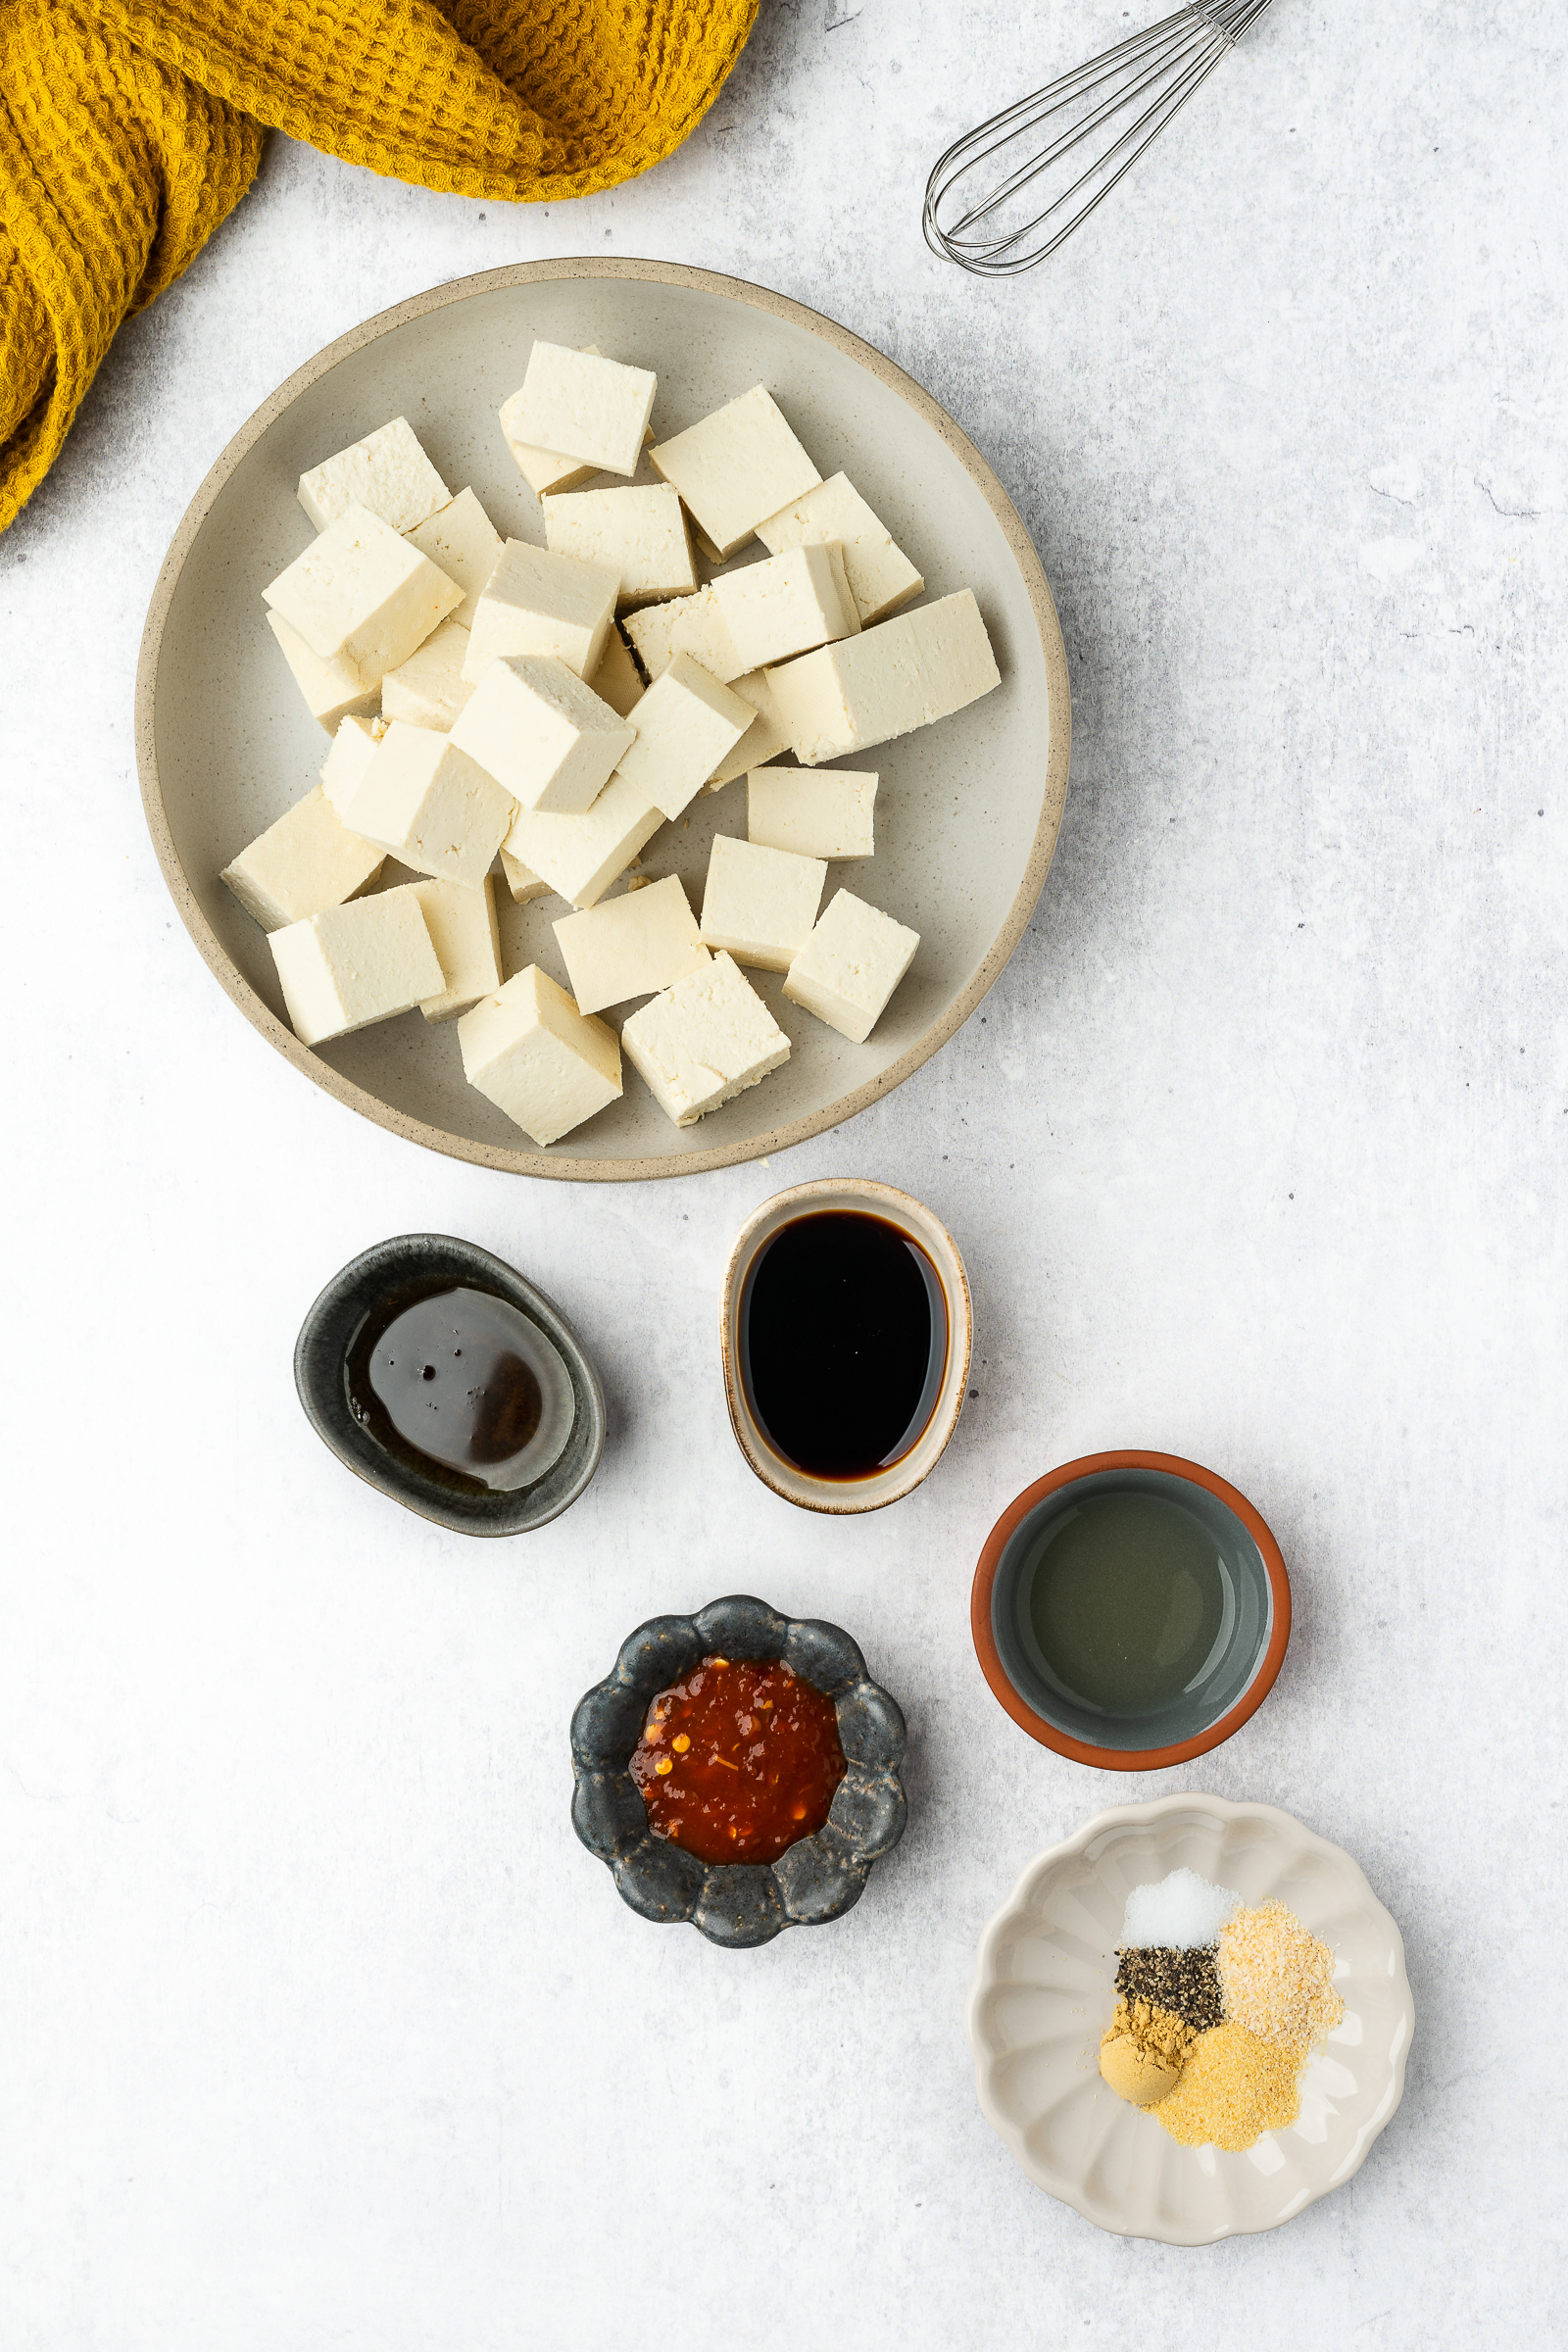 Cubed tofu in a shallow bowl with the marinade ingredients in small dishes.